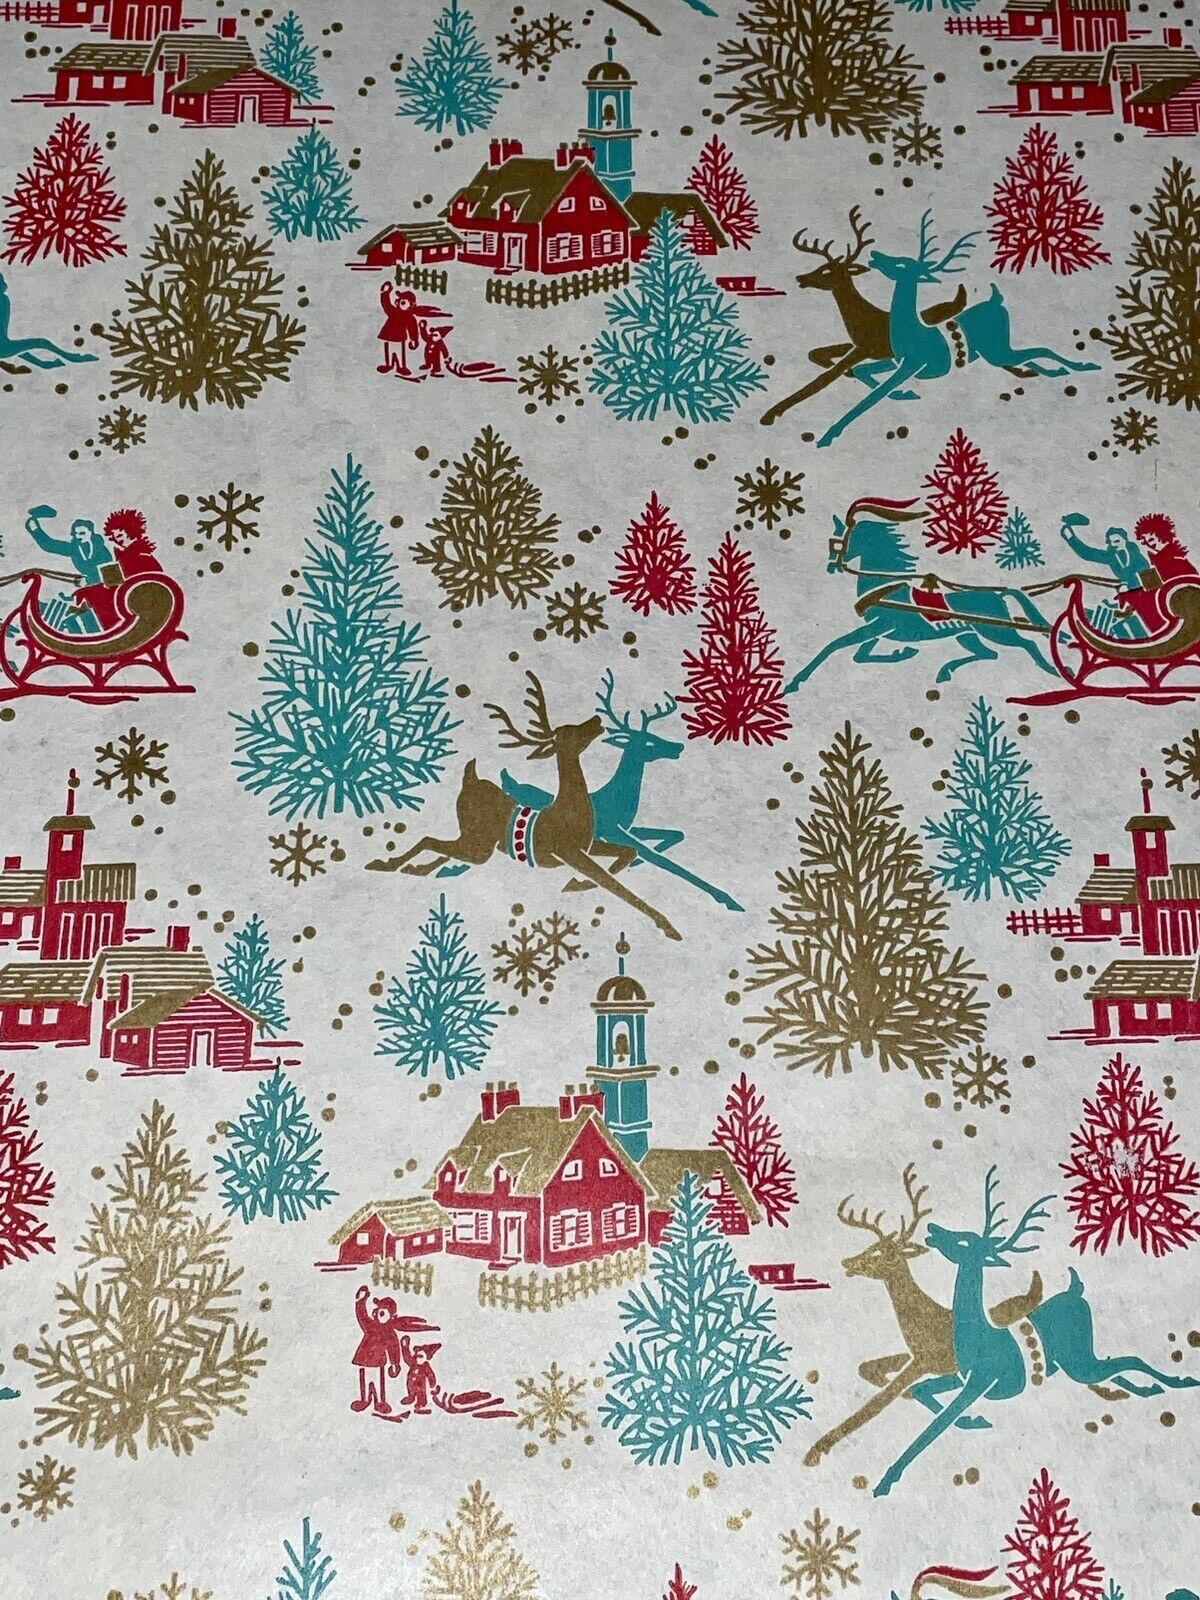 VTG CHRISTMAS WRAPPING PAPER GIFT WRAP REINDEER SLEIGH TREE TEAL RED GOLD